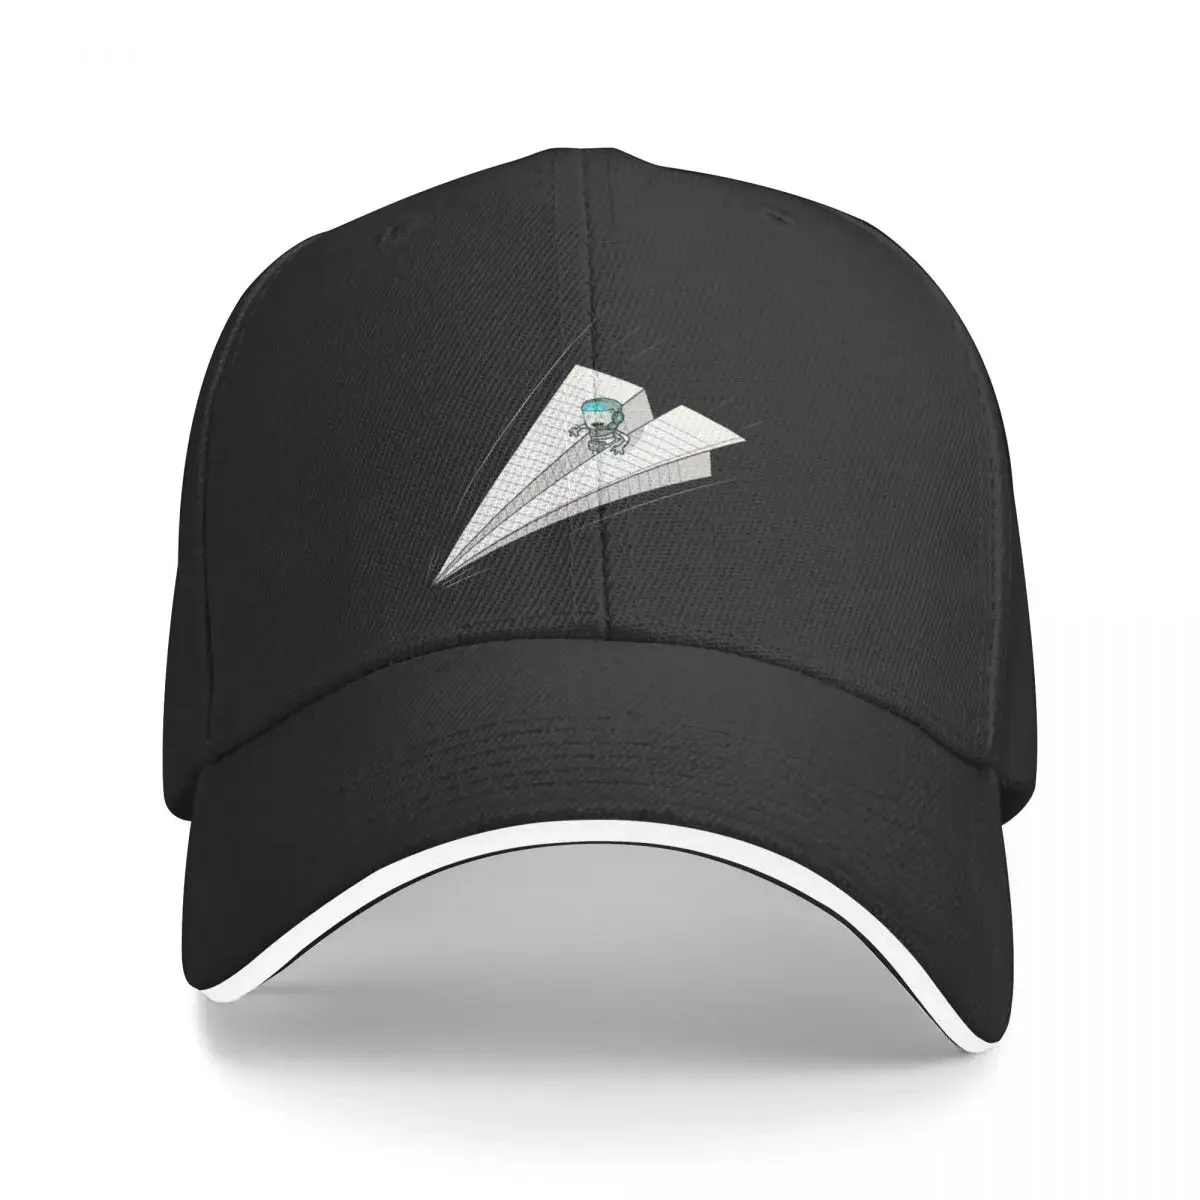 

New Oxygen Not Included - Paper Airplane Pilot Baseball Cap party hats black Boy Child Hat Women's